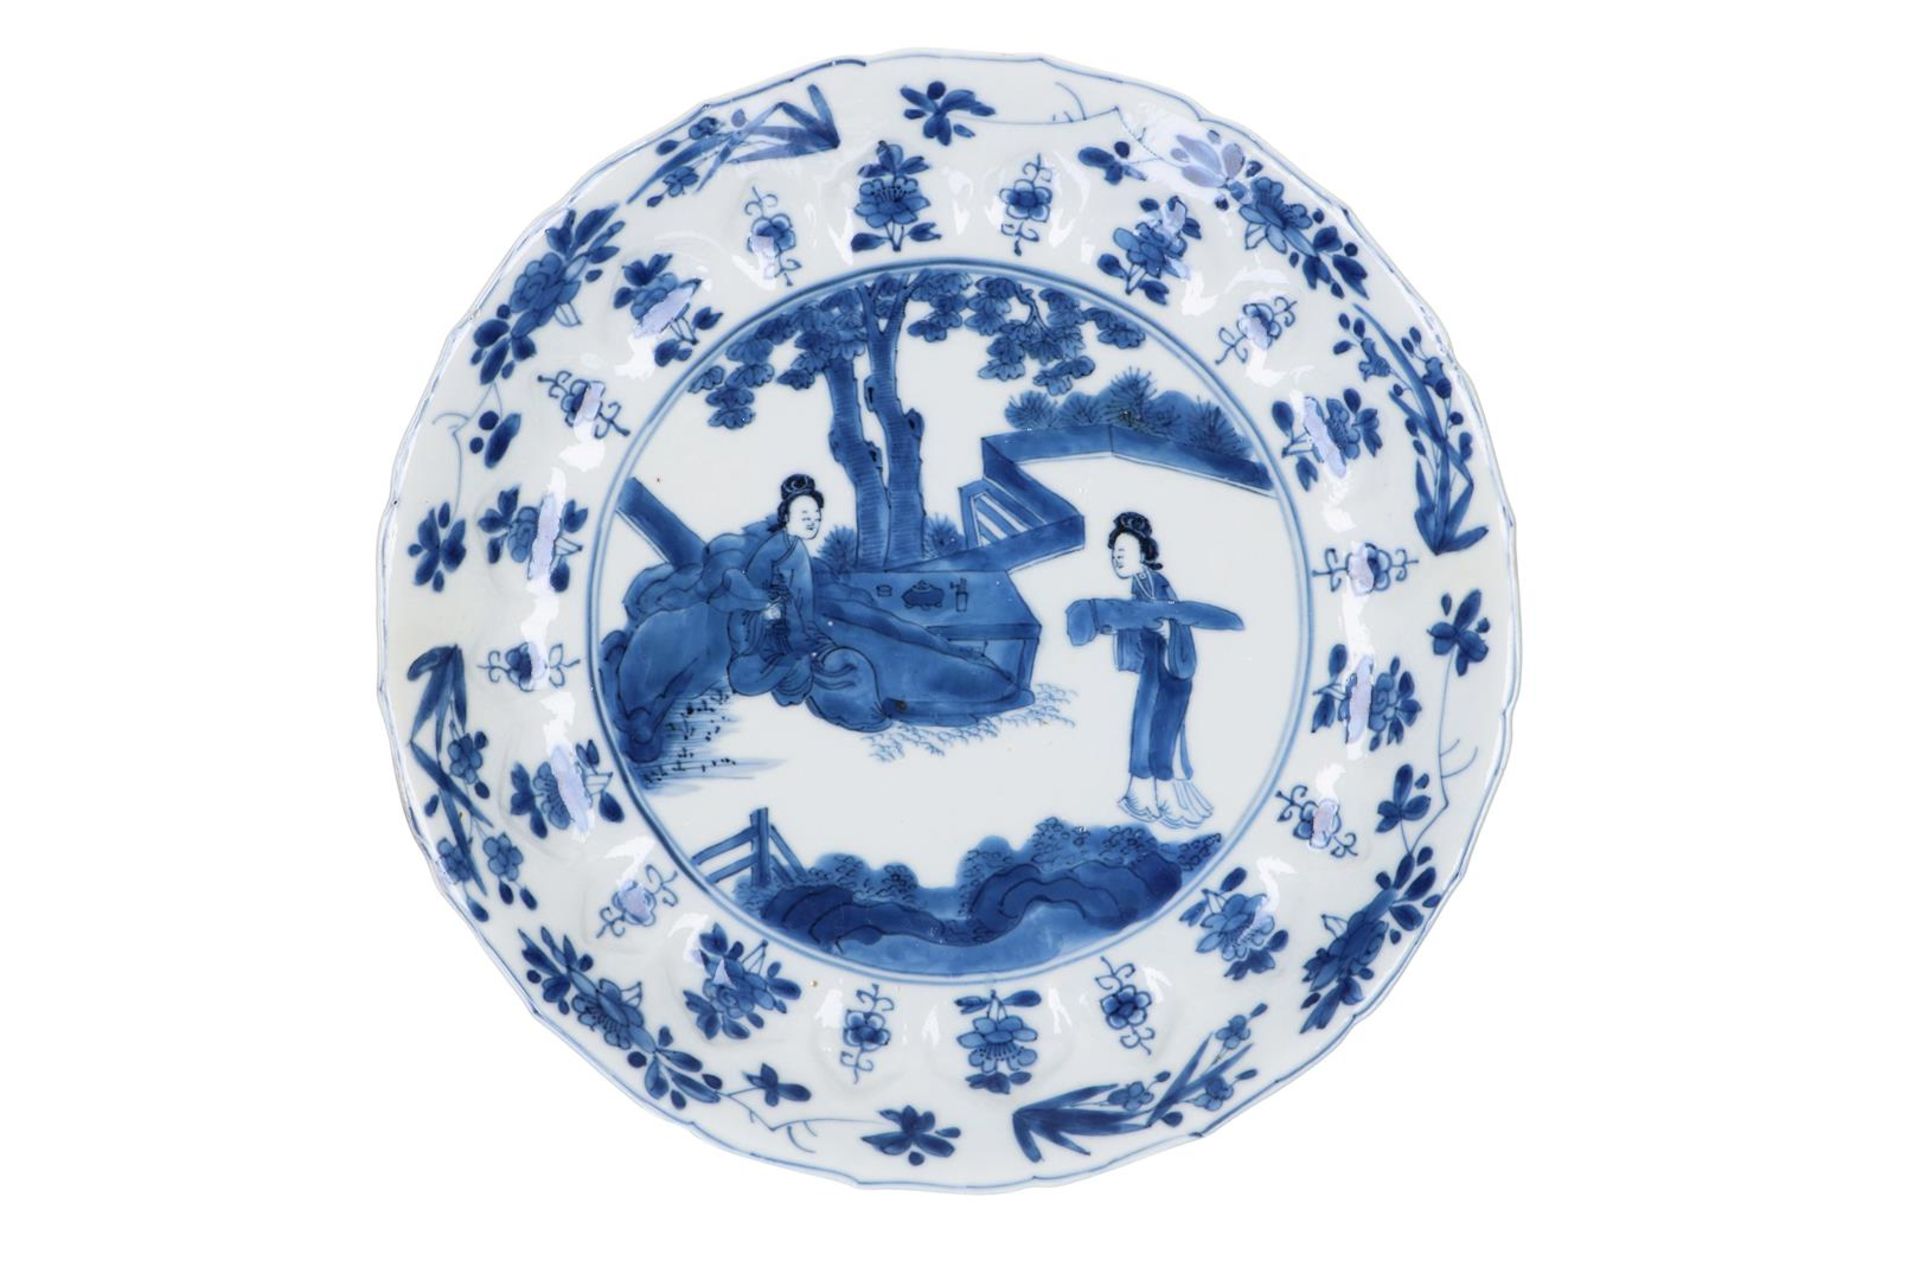 A blue and white porcelain dish with scalloped rim, decorated with ladies in a garden and flowers. - Image 3 of 5